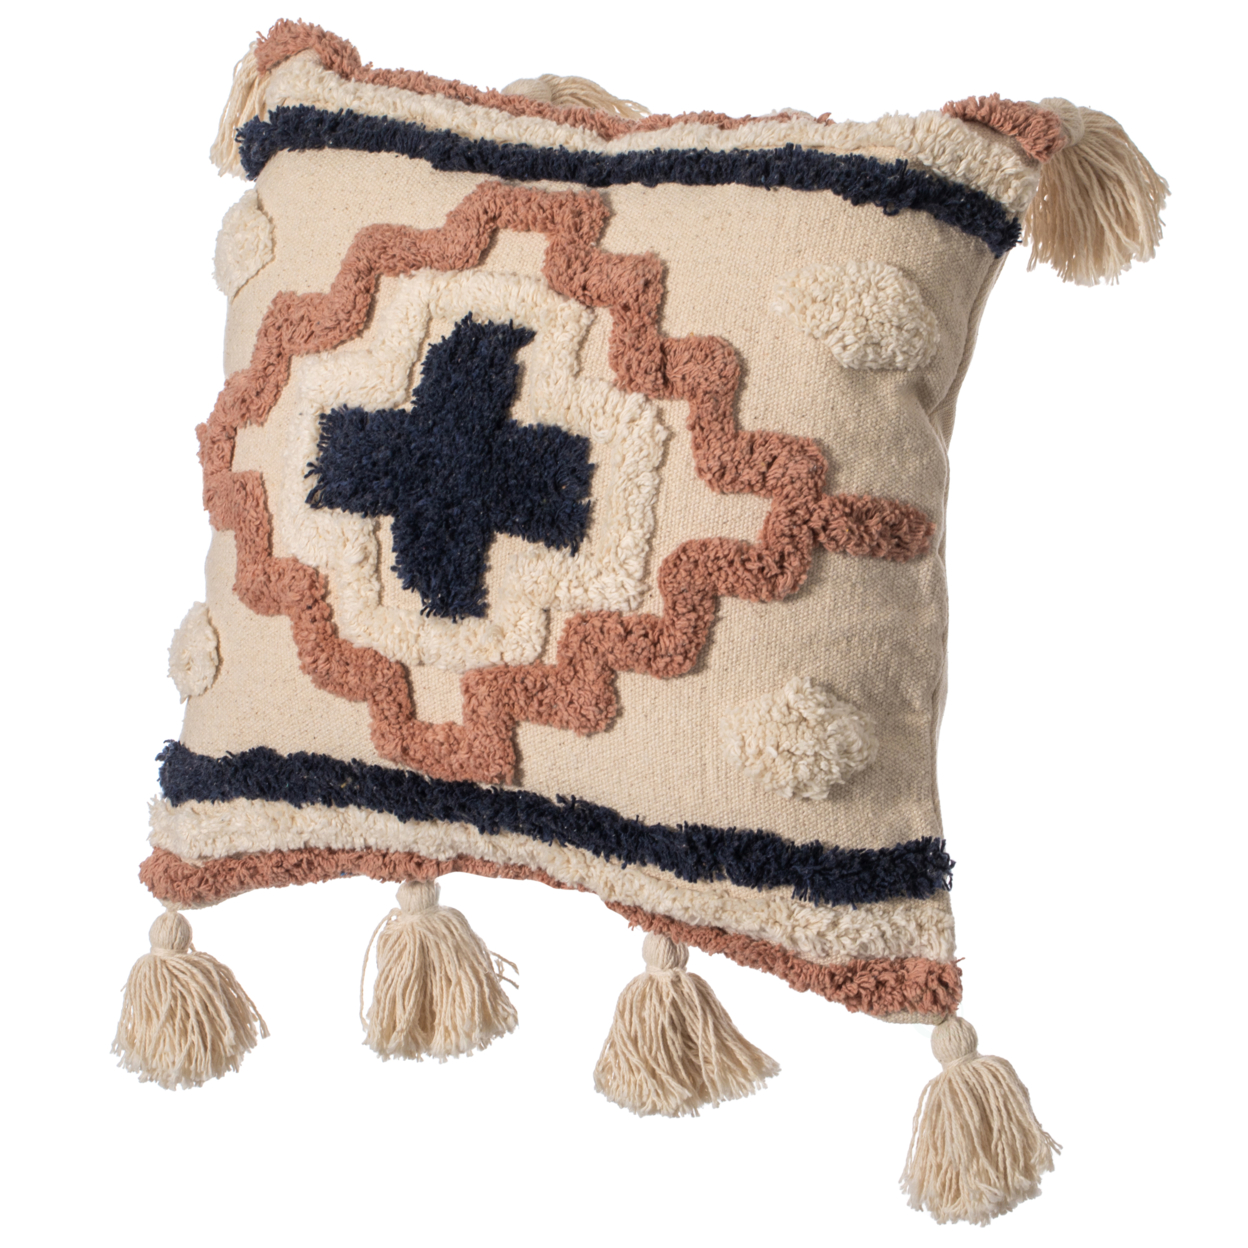 16 Handwoven Cotton Throw Pillow Cover With Tufted Designs And Side Tassels - Star